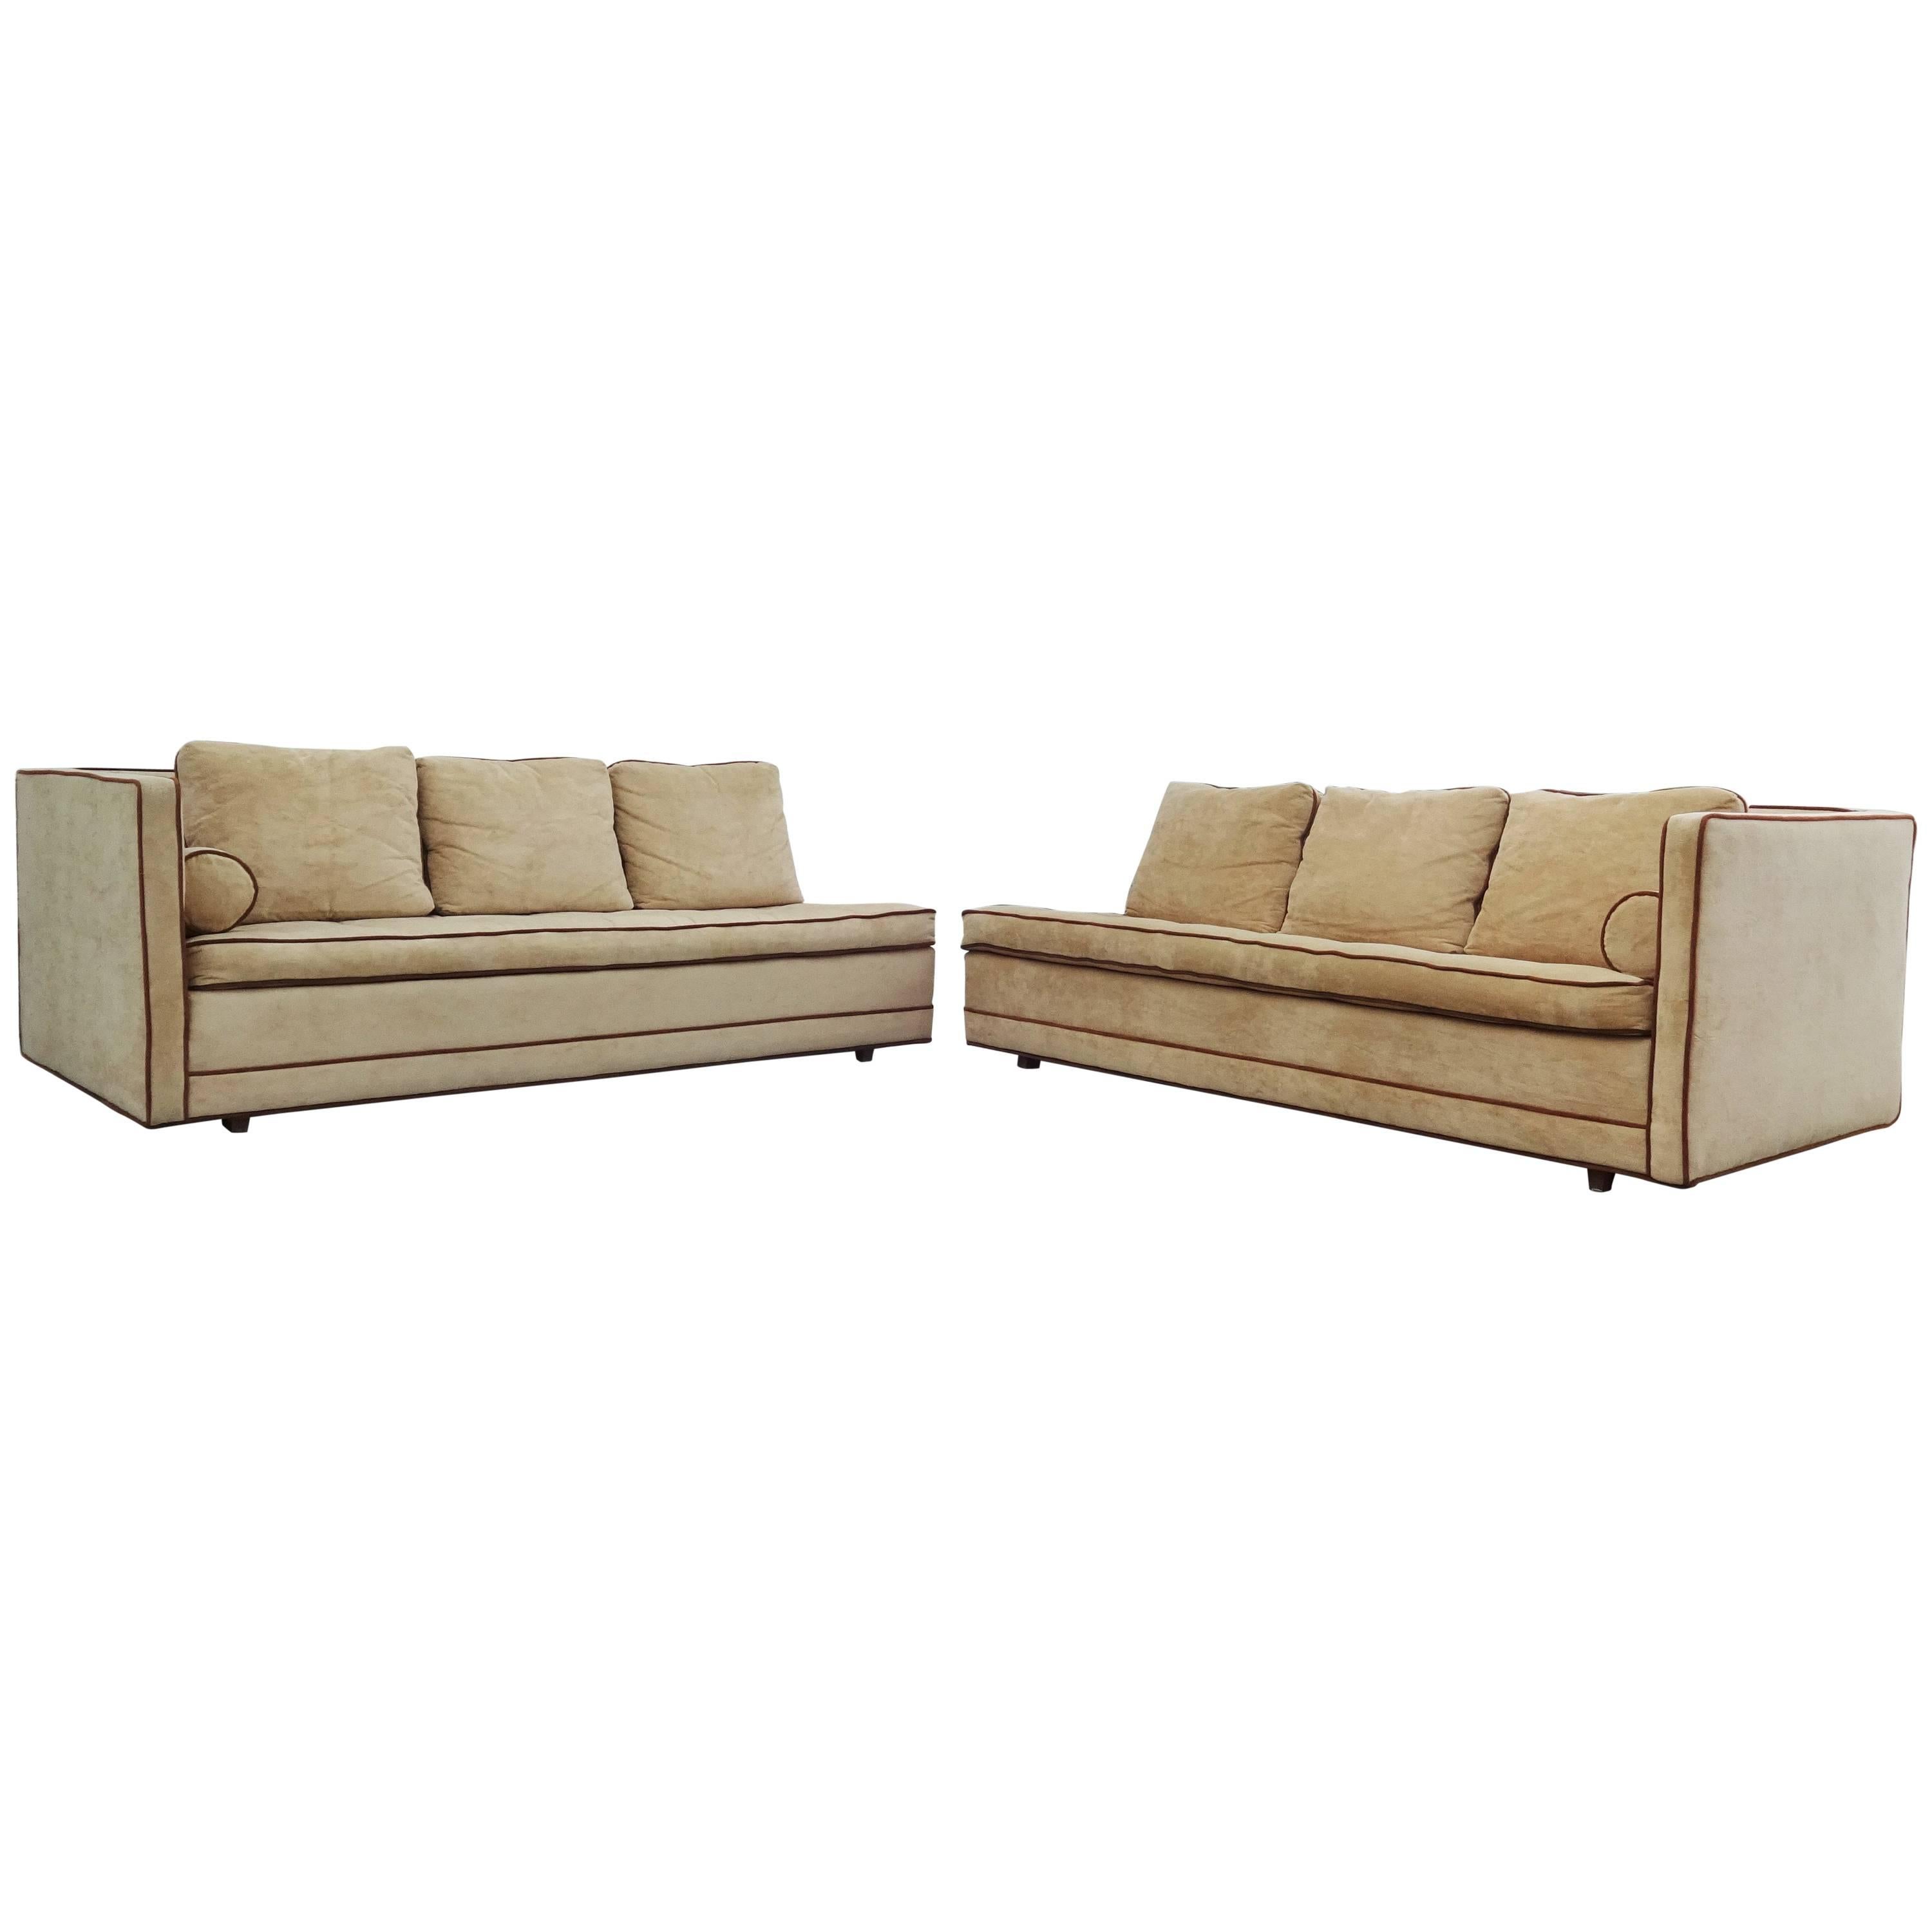 Stunning Two-Piece Harvey Probber Sectional Sofa For Sale